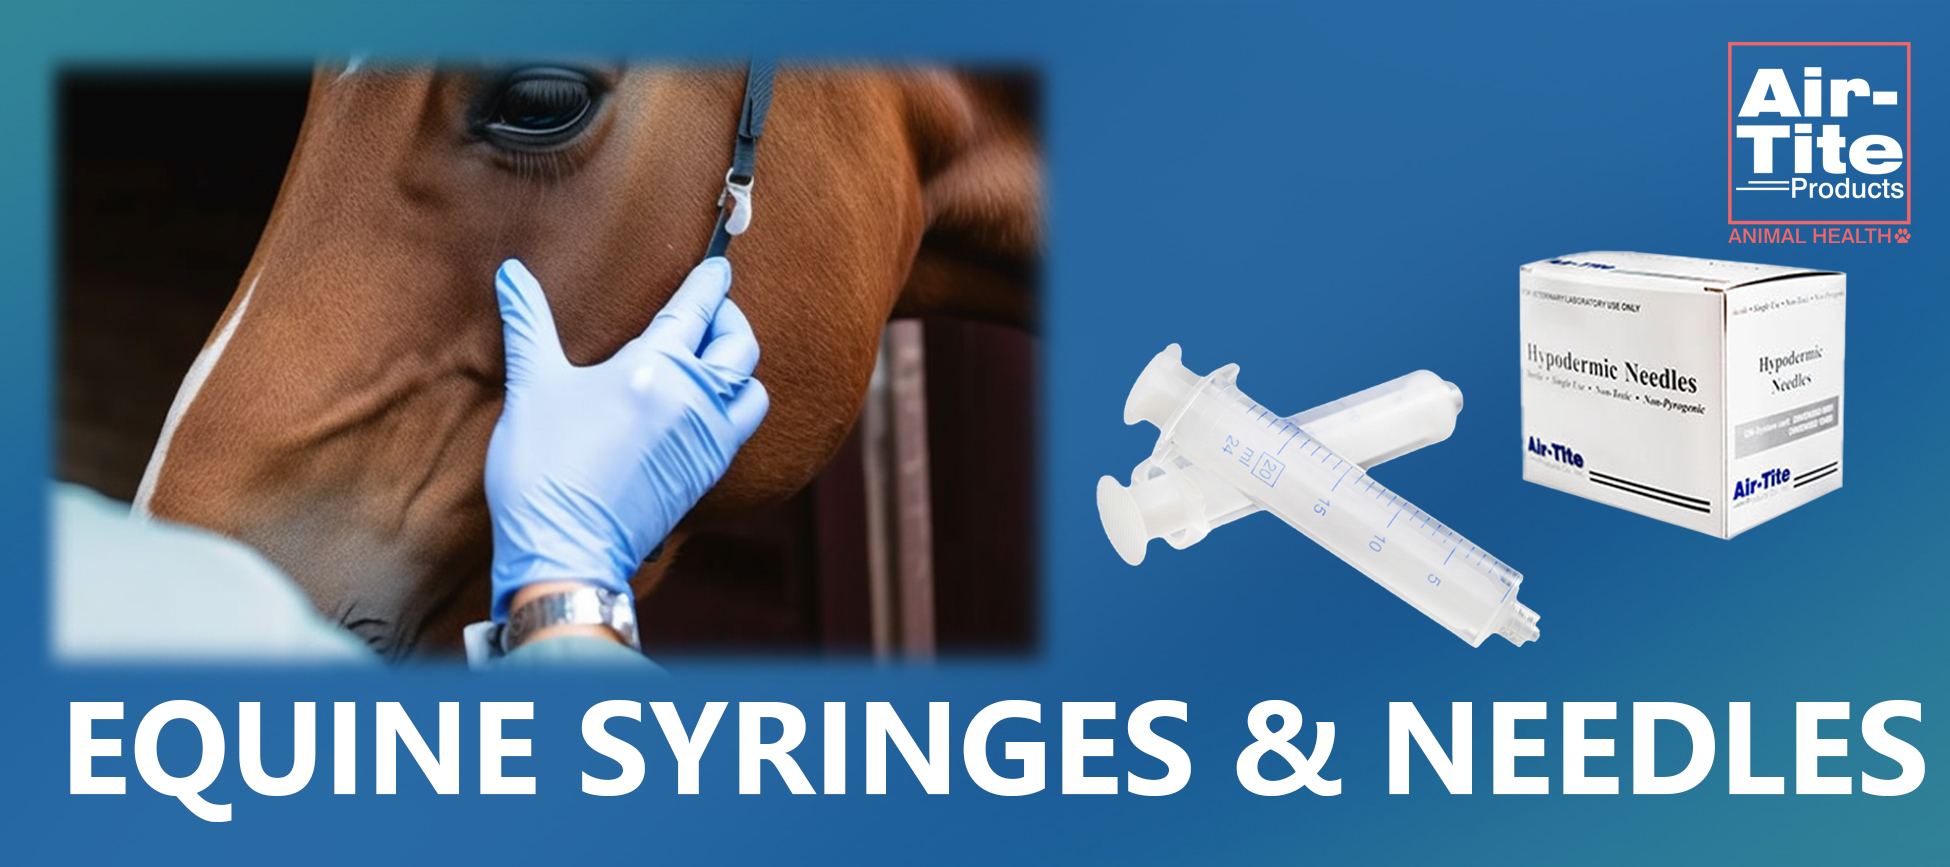 Equine syringes and needles from Air-Tite Products